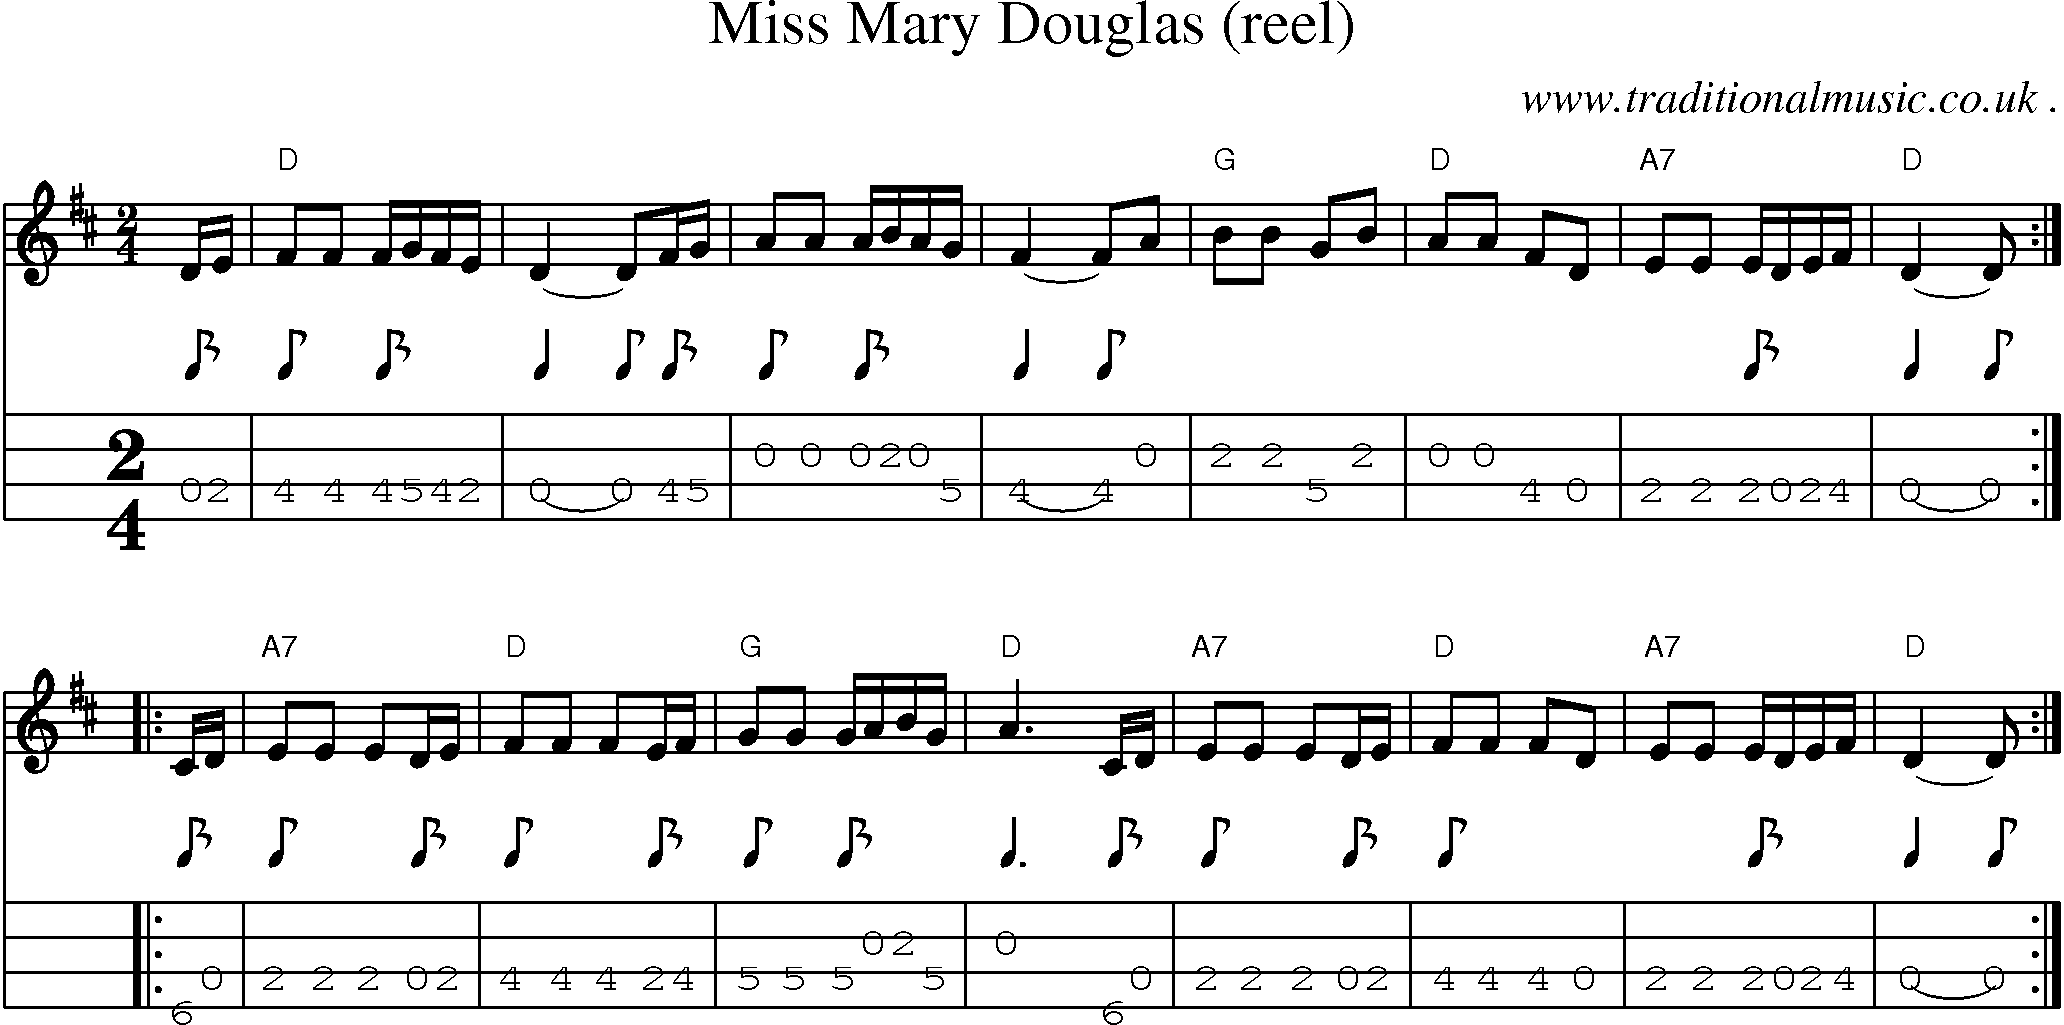 Sheet-music  score, Chords and Mandolin Tabs for Miss Mary Douglas Reel